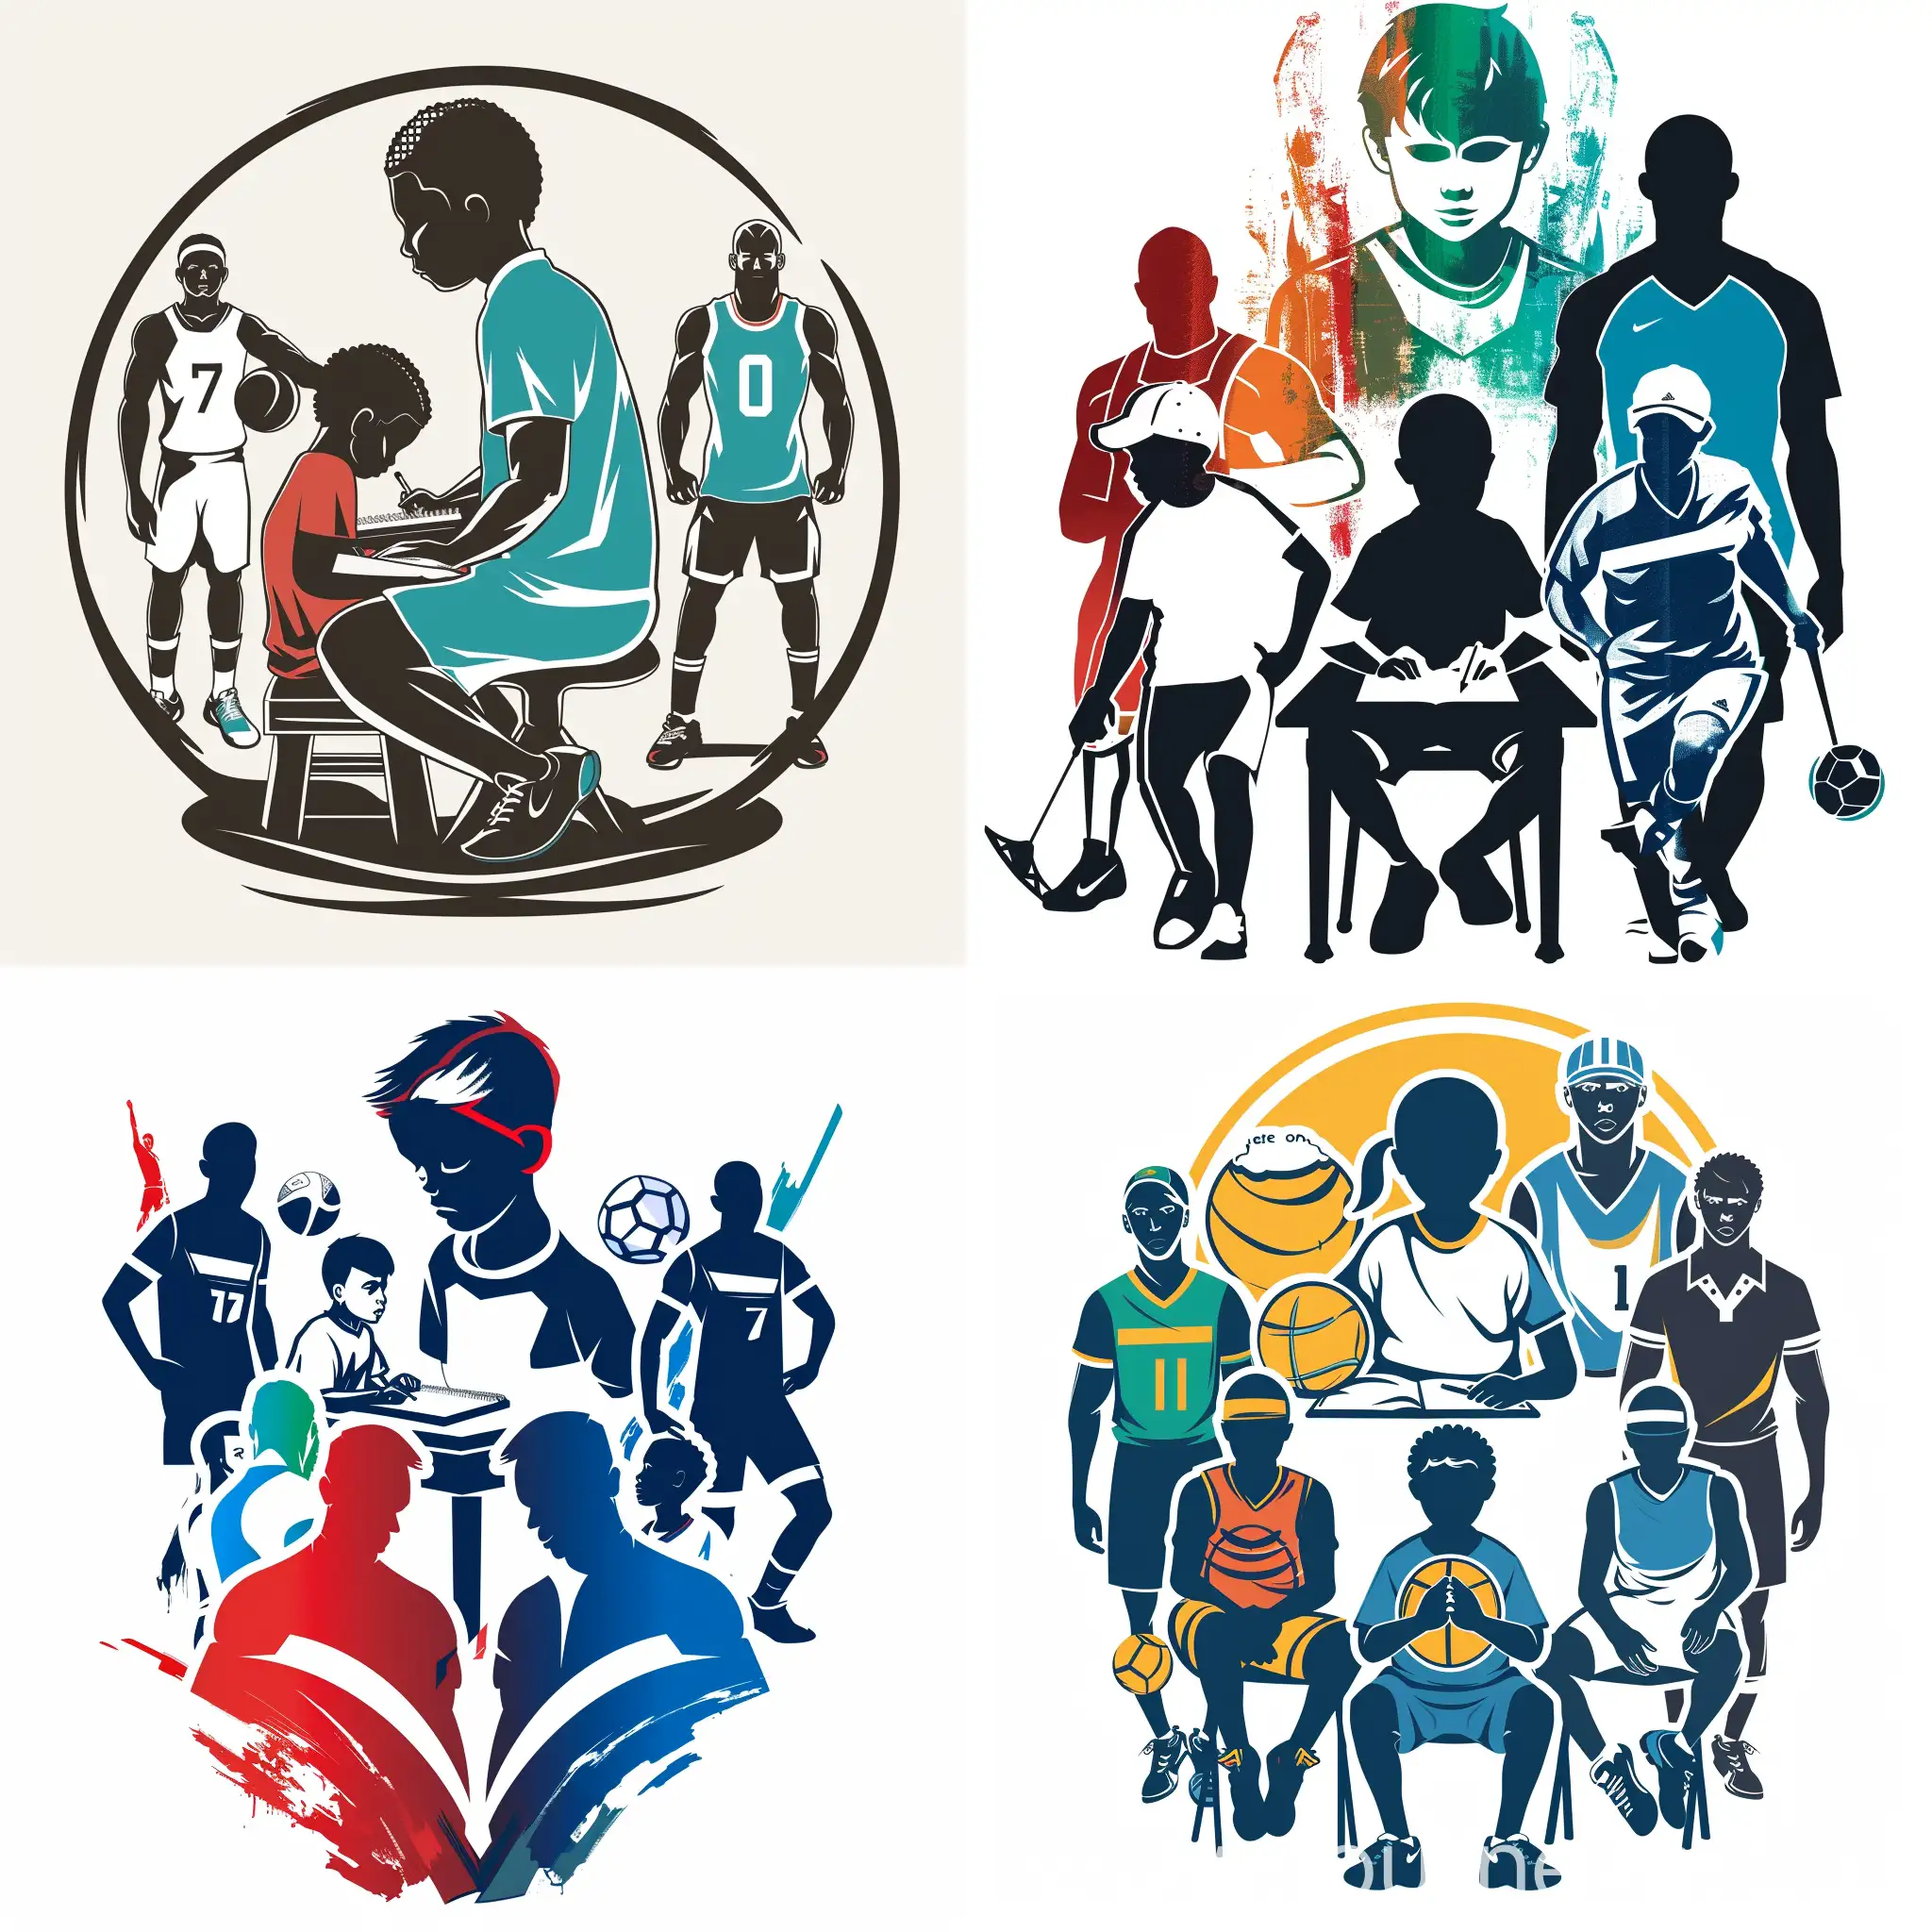 We want the logo to feature a child doing homework in the background and athletes representing different sports.